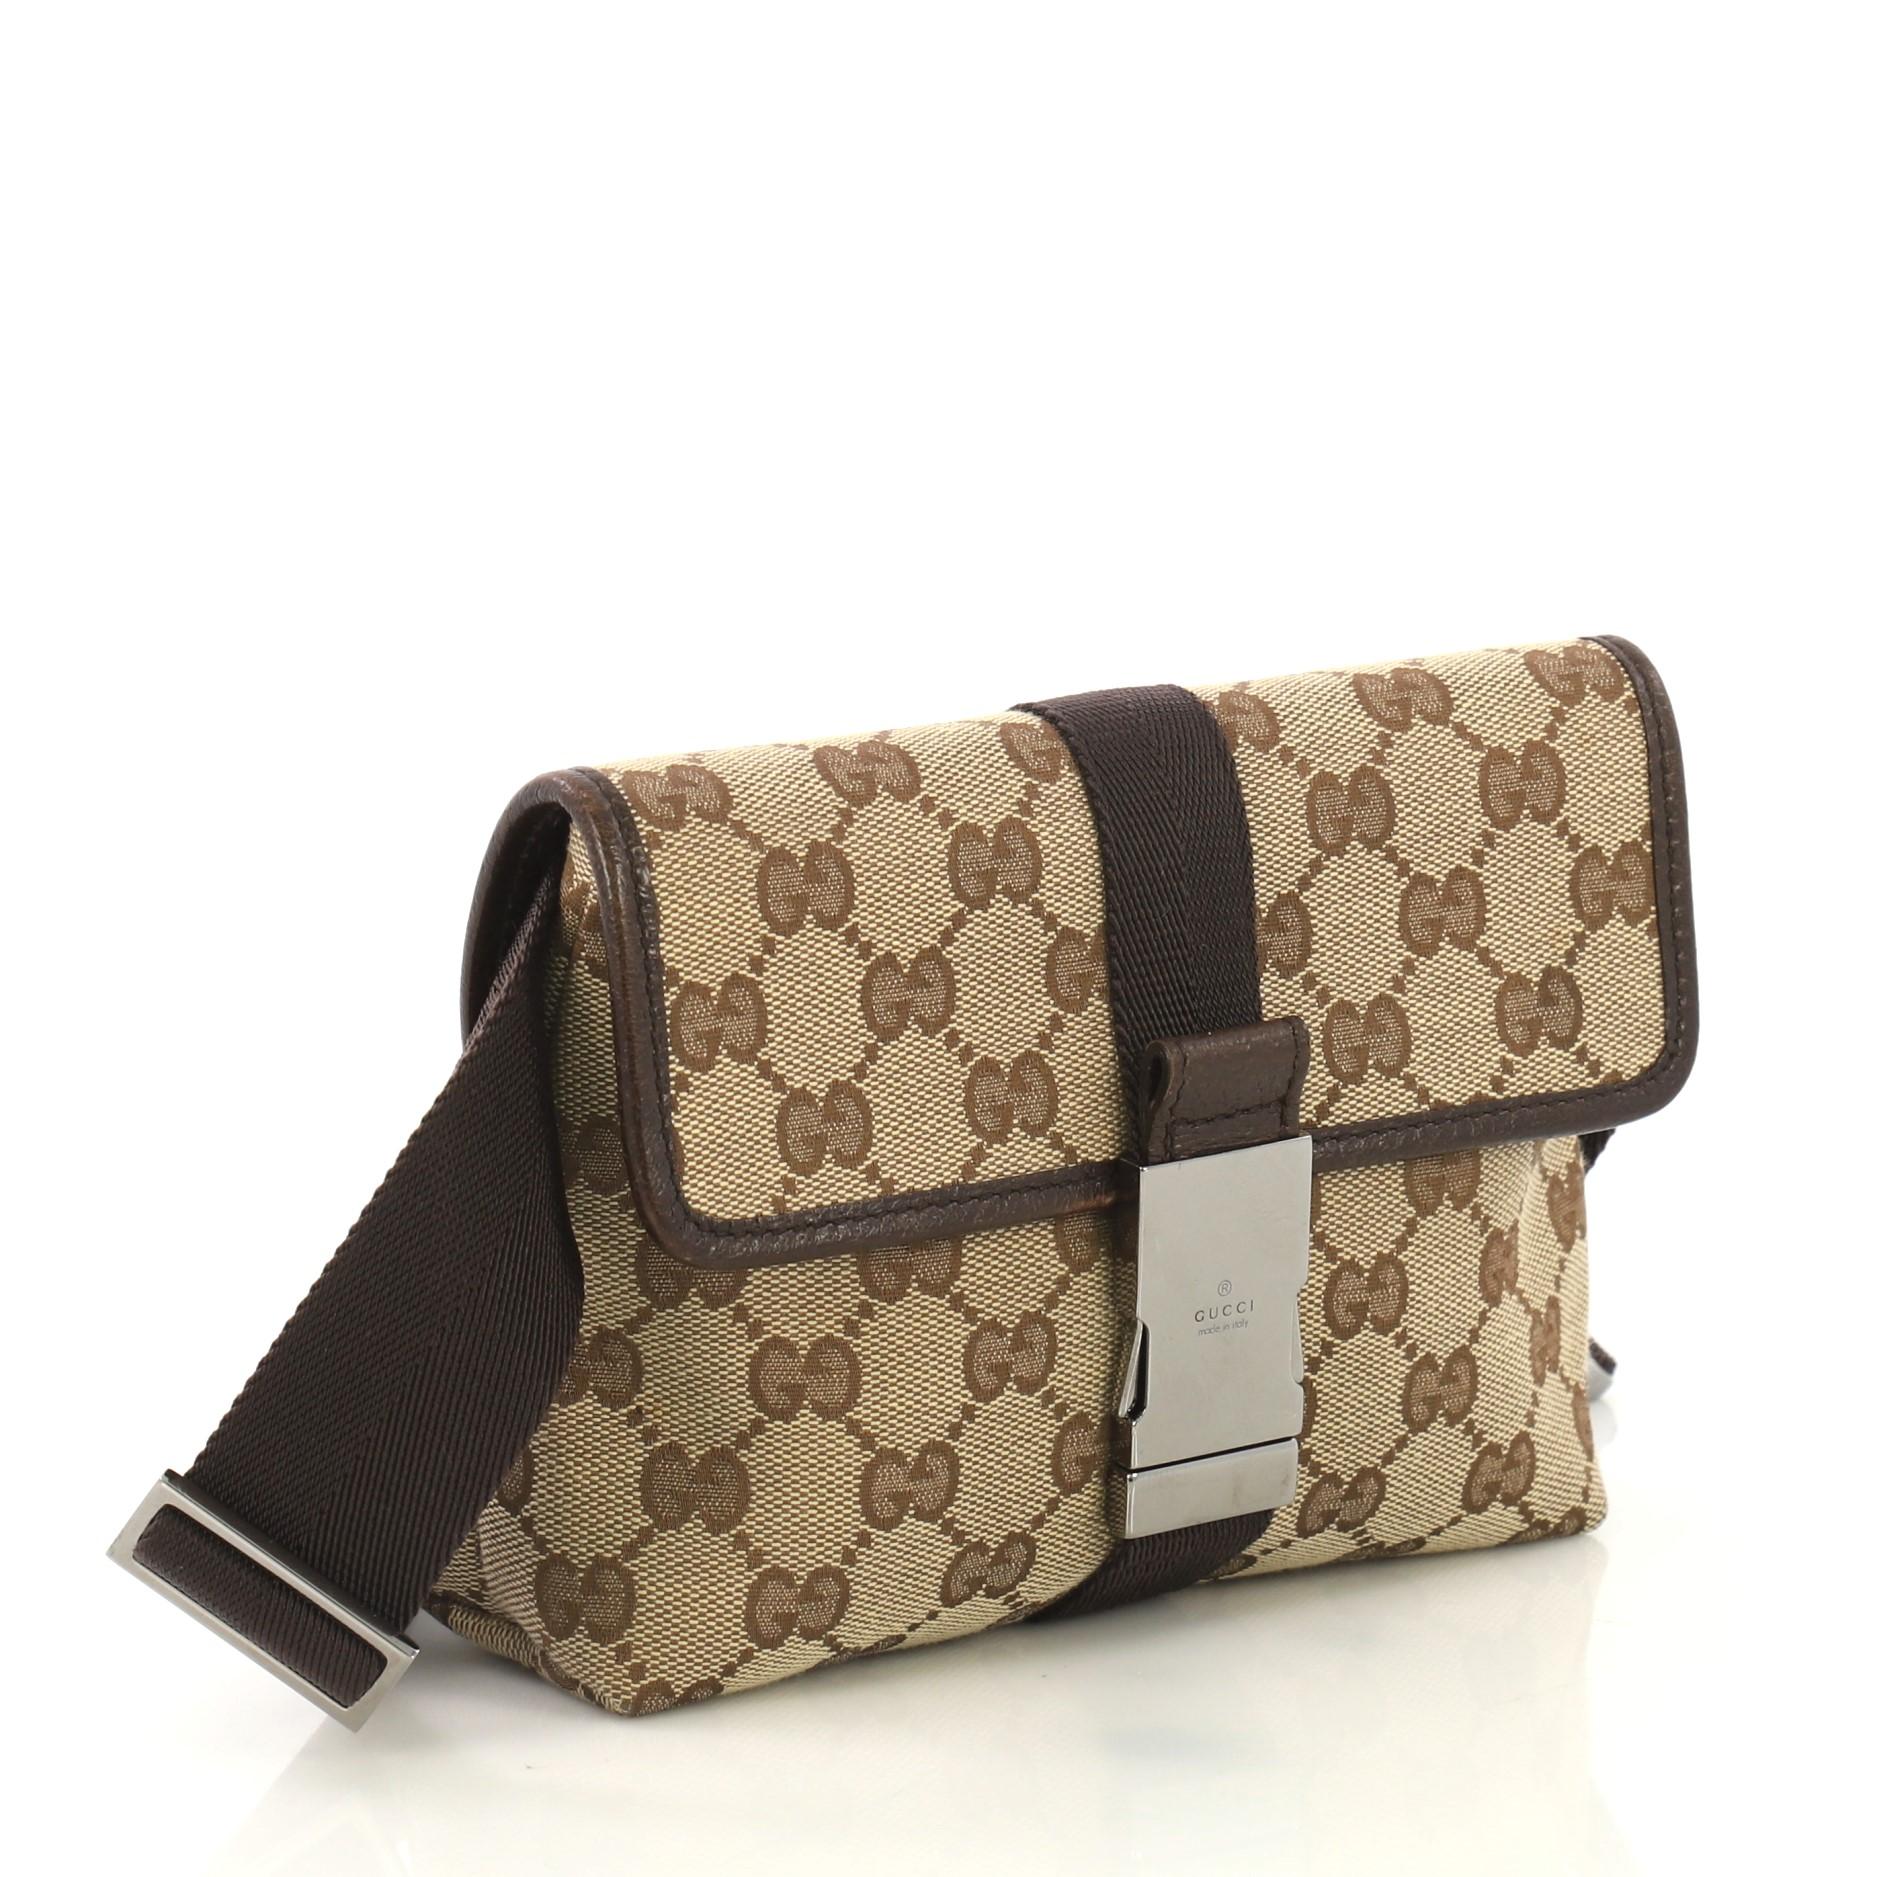 This Gucci Buckle Waist bag GG Canvas Small, crafted in brown GG canvas, features an adjustable waist strap, leather trims and gunmetal-tone hardware. Its buckle closure opens to a brown fabric interior with zip pocket. 

Condition: Very good. Wear